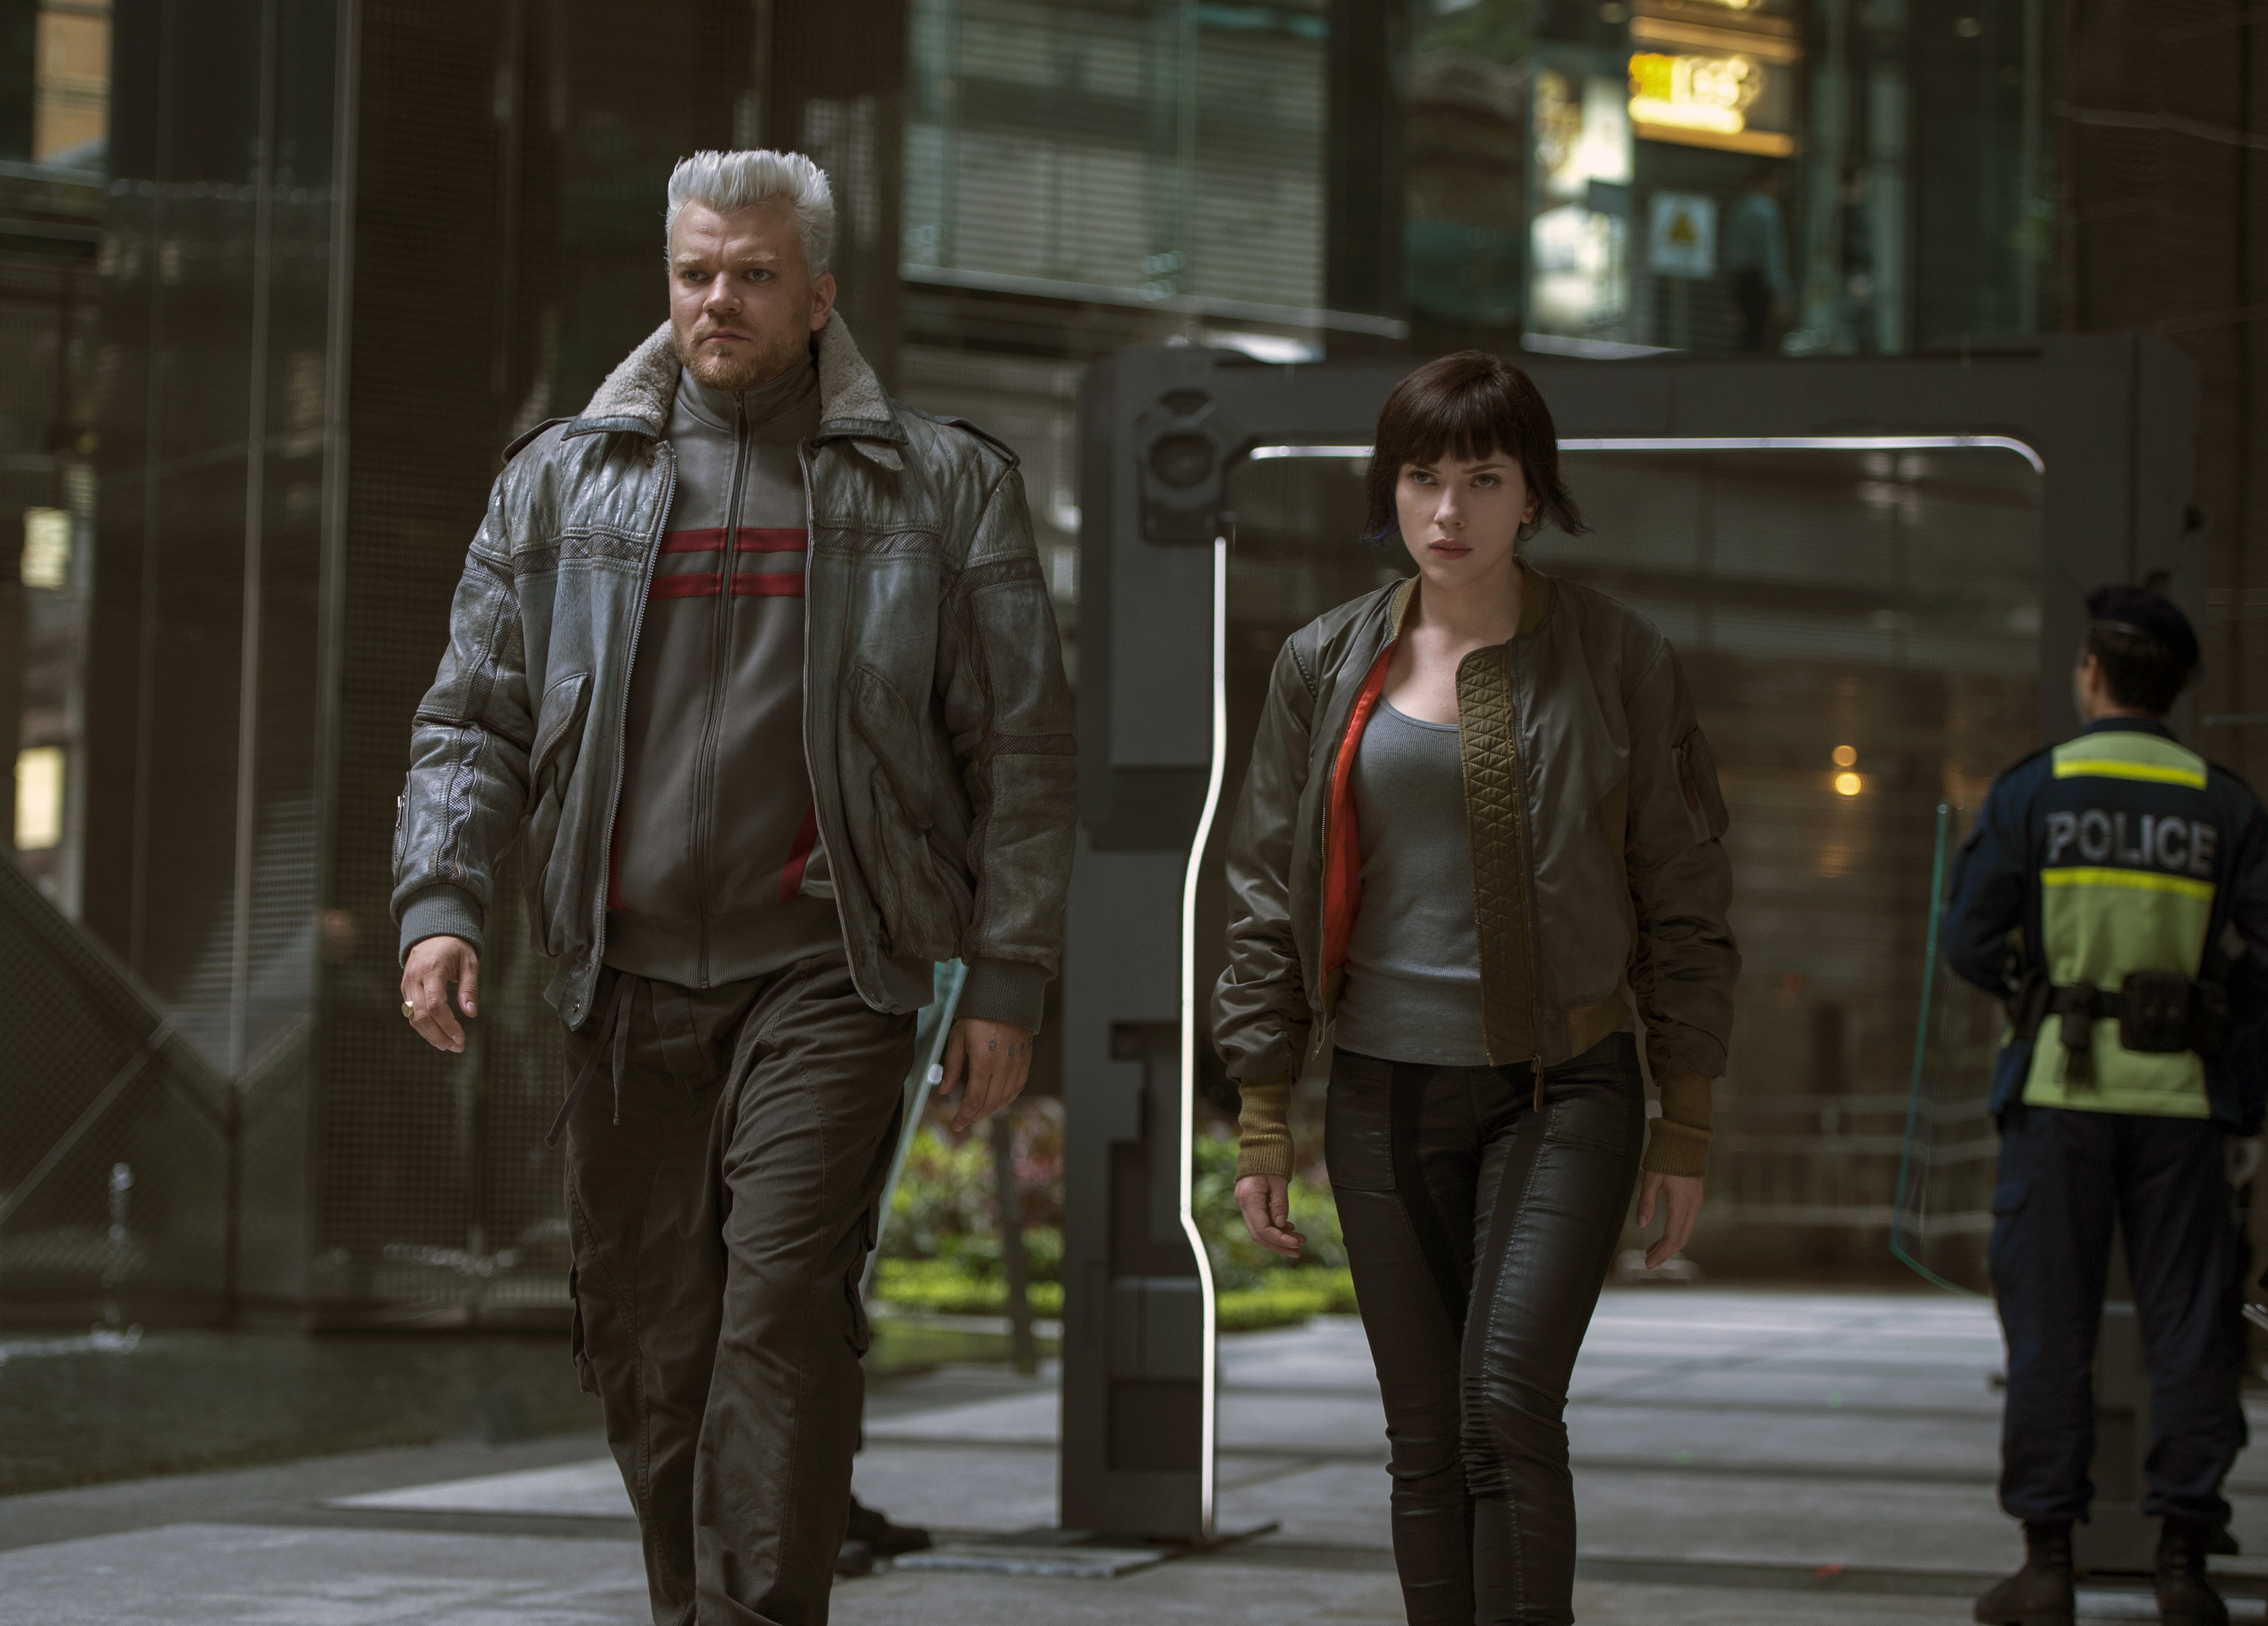 White-washing is a glaring problem with ‘Ghost in the Shell’ - The Blade